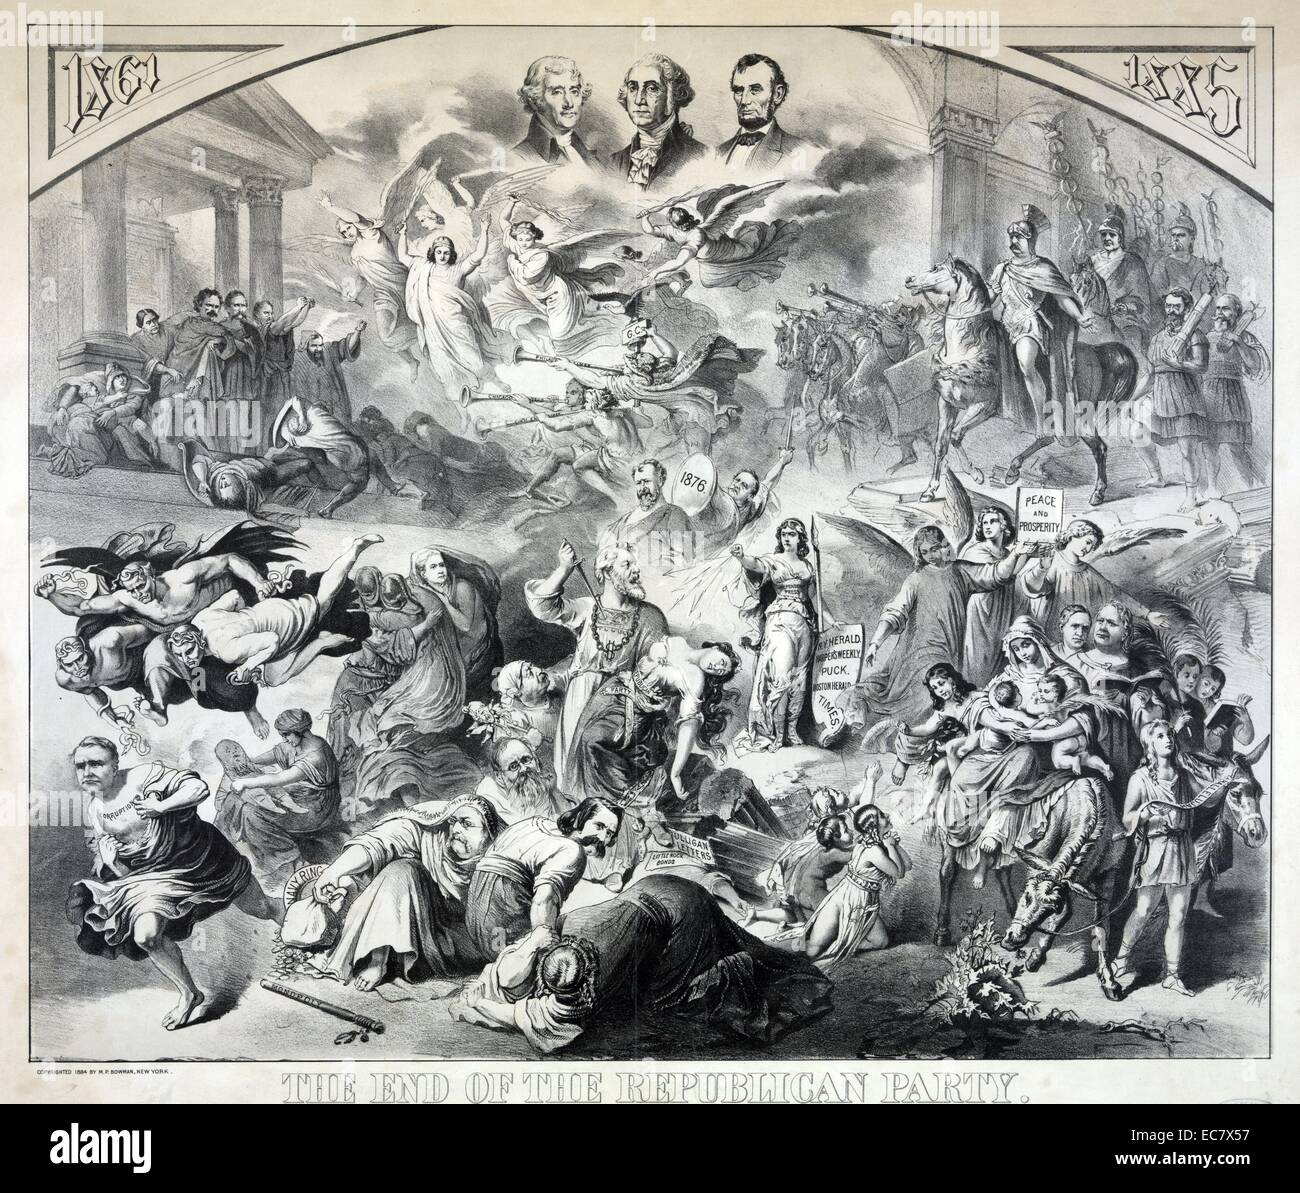 The end of the republican party After 'The Destruction of Jerusalem' by Kaulbach.' After a large painting by Wilhelm von Kaulbach showing the 'destruction of Jerusalem', this print shows the demise of the Republican Party with various Republicans, Mugwumps, Democrats, and allegorical figures, along with portraits of Jefferson, Washington, and Lincoln, as well as the newly elected Democratic president Grover Cleveland on horseback (as the Roman emperor Titus), with Vice President Thomas A. Hendricks on horseback behind him, and Carl Schurz and another man, carrying fasces, walking beside them. Stock Photo